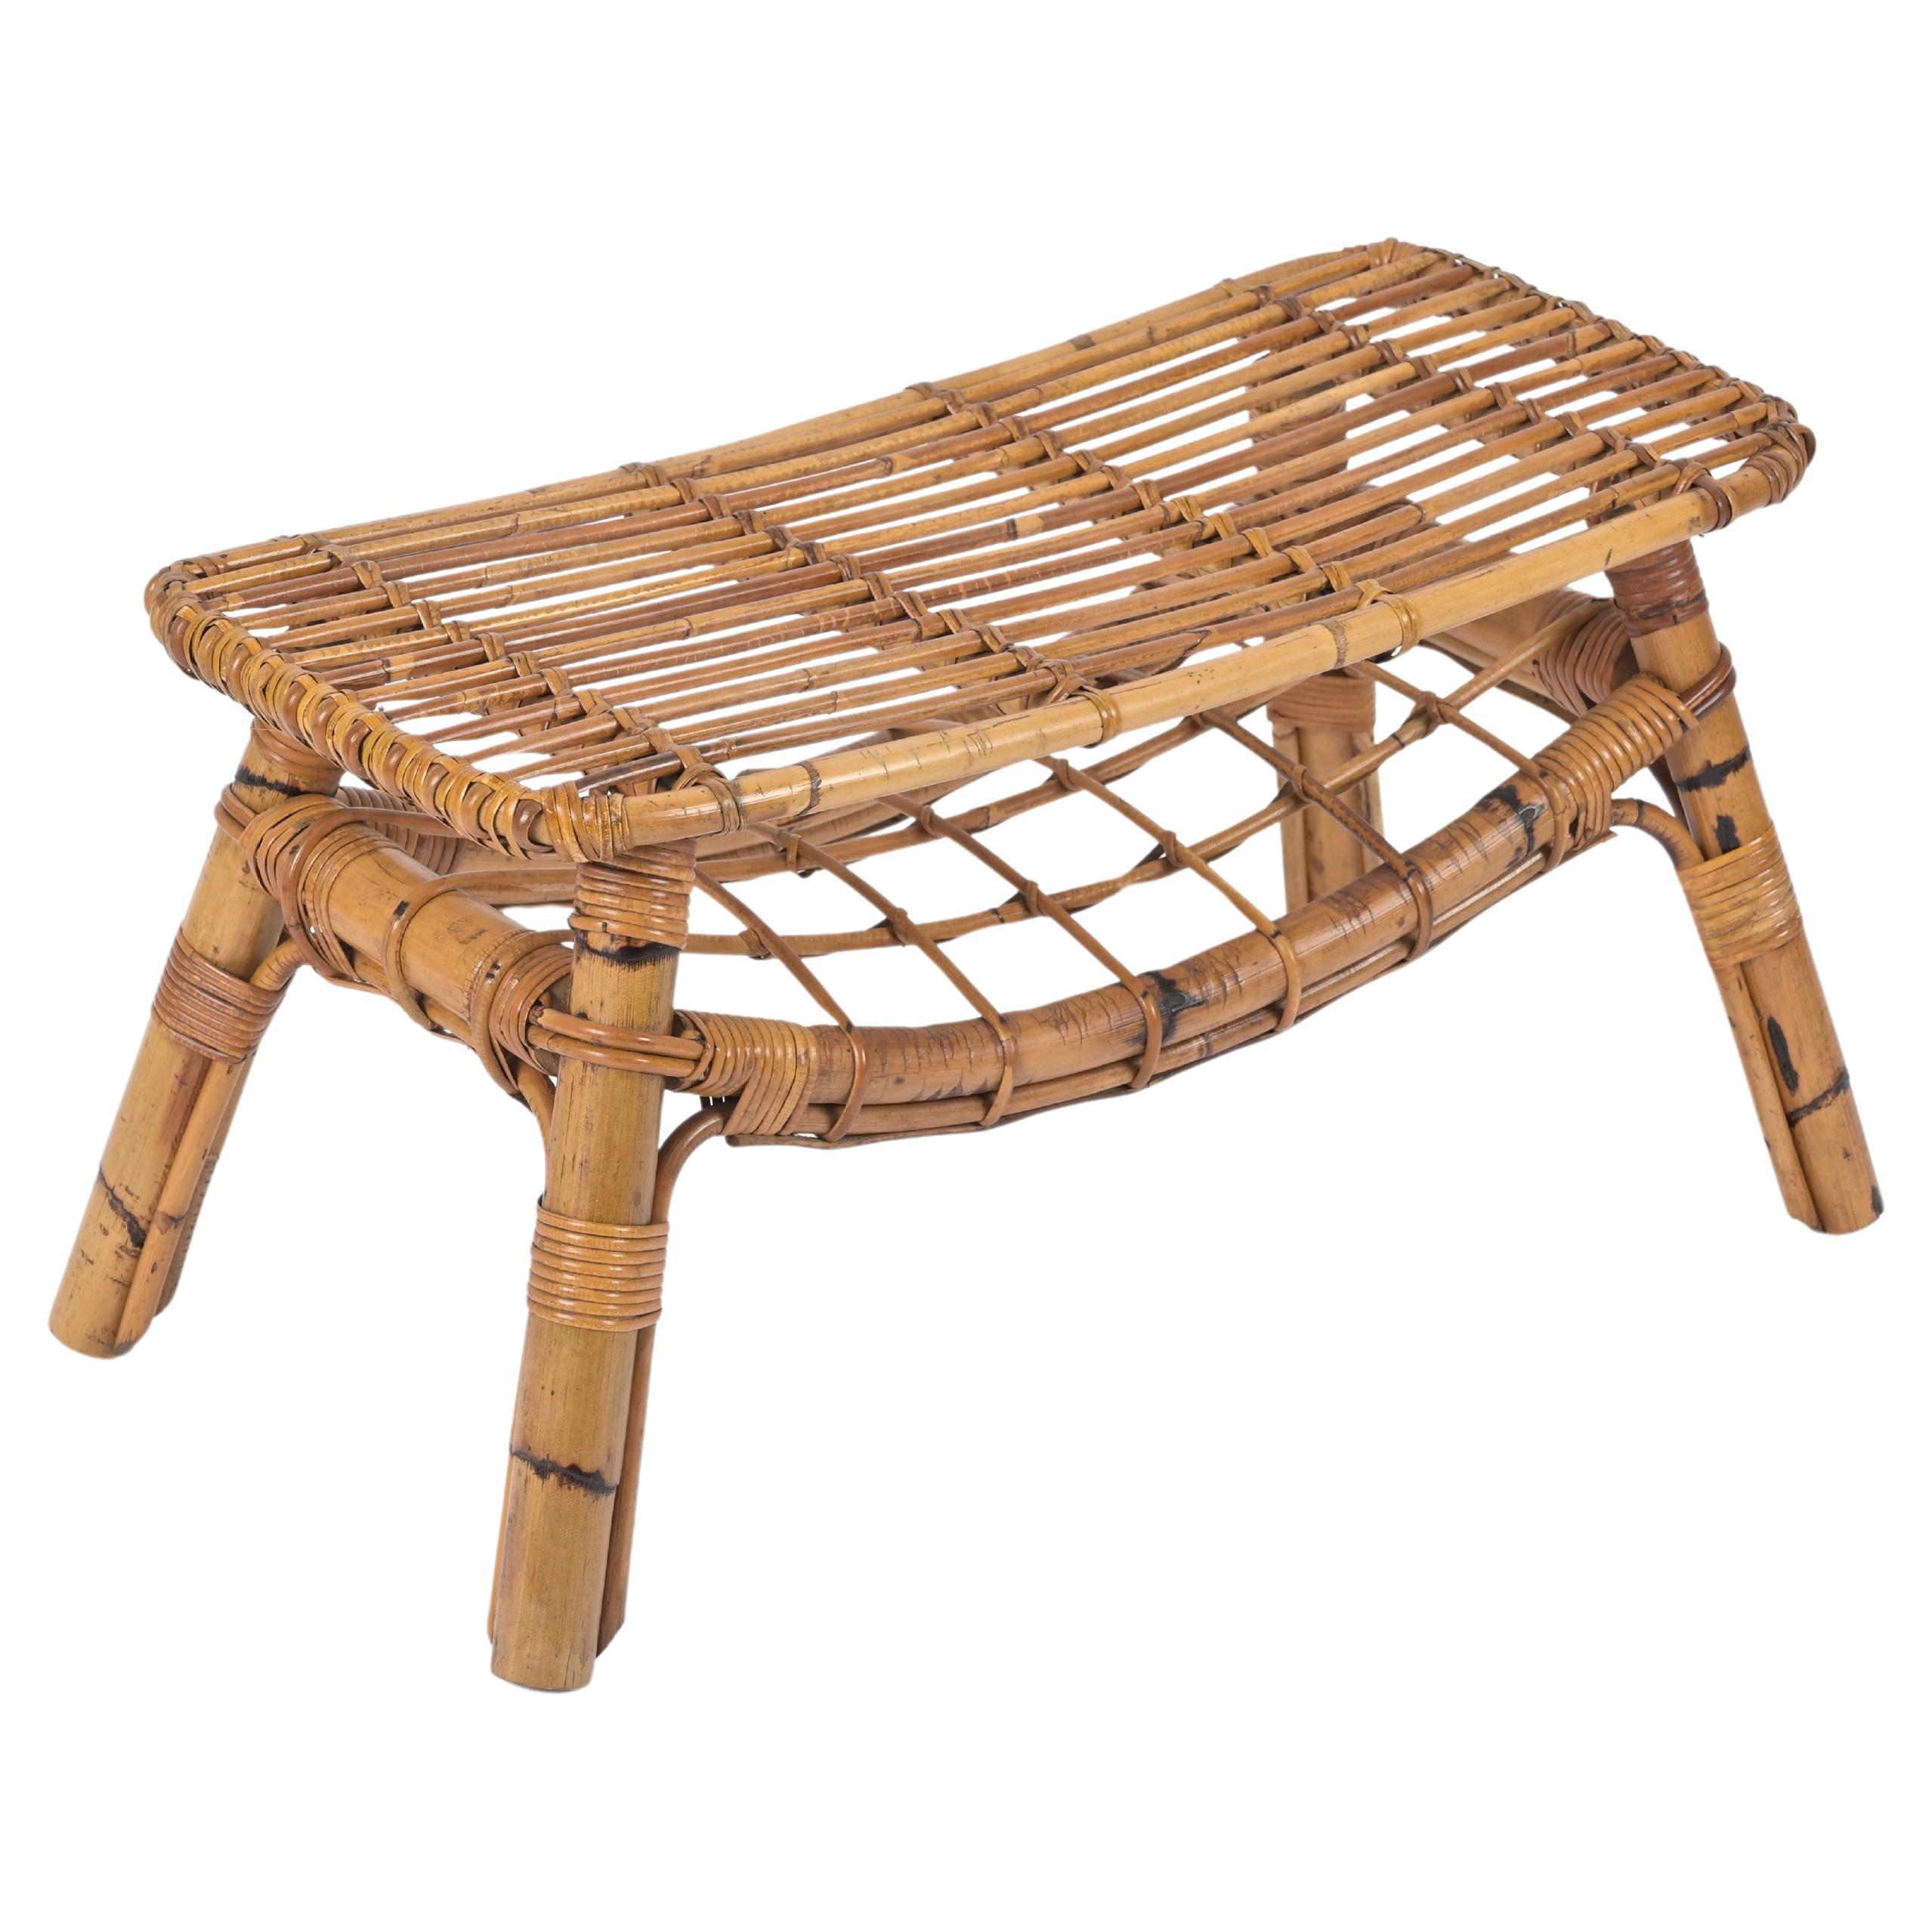 Italian Coffee Table or Bench in Rattan and Wicker by Tito Agnoli, 1960s For Sale